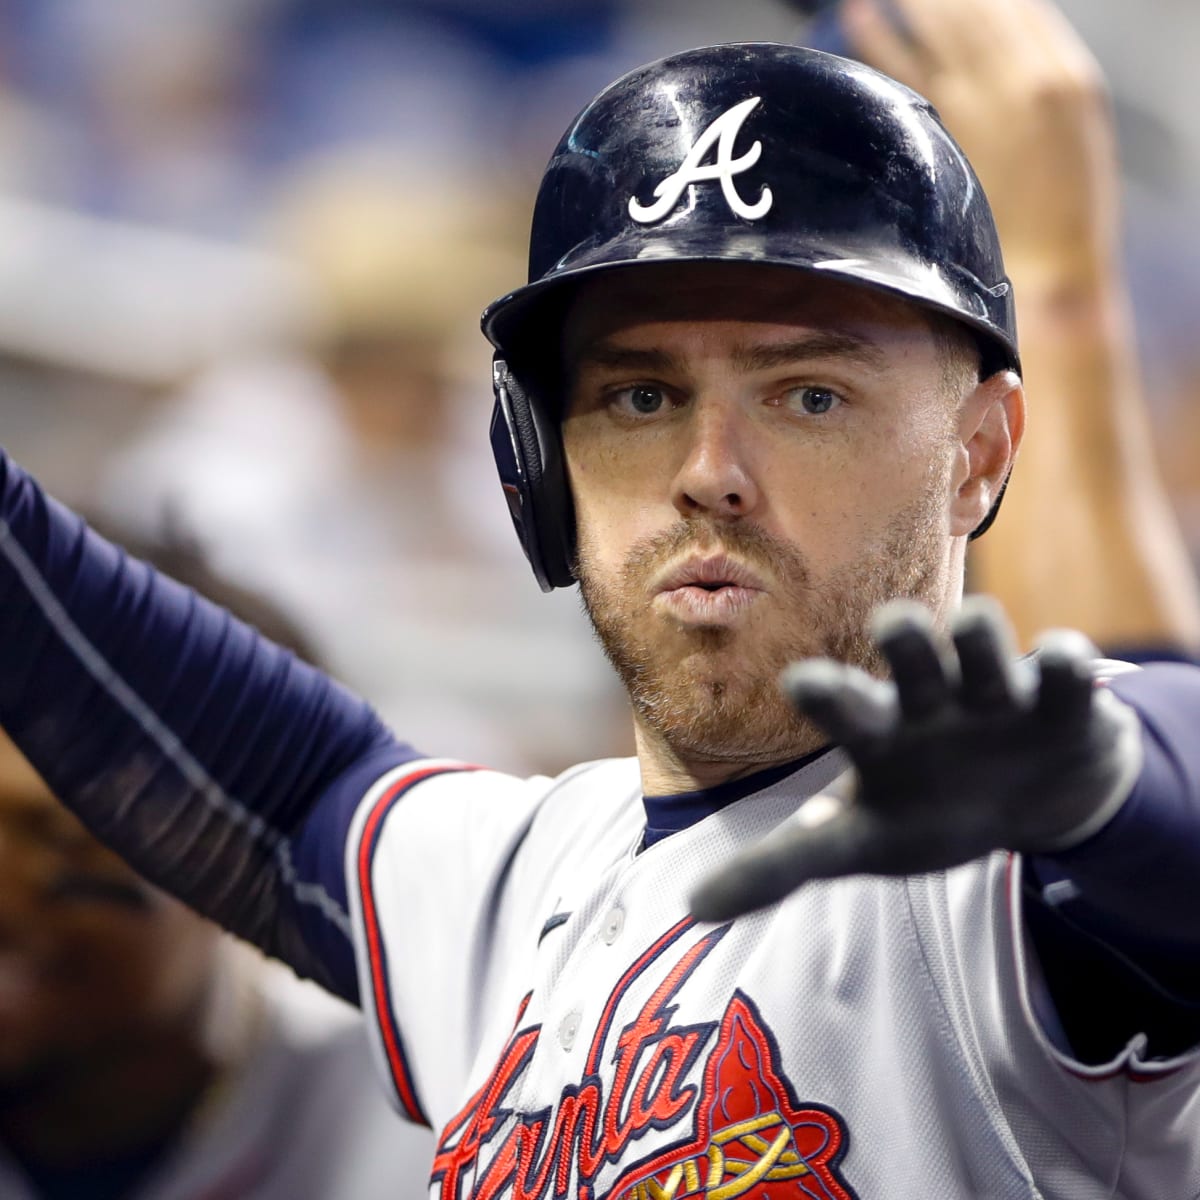 Is Braves' Freddie Freeman a Hall of Famer? He's on the right